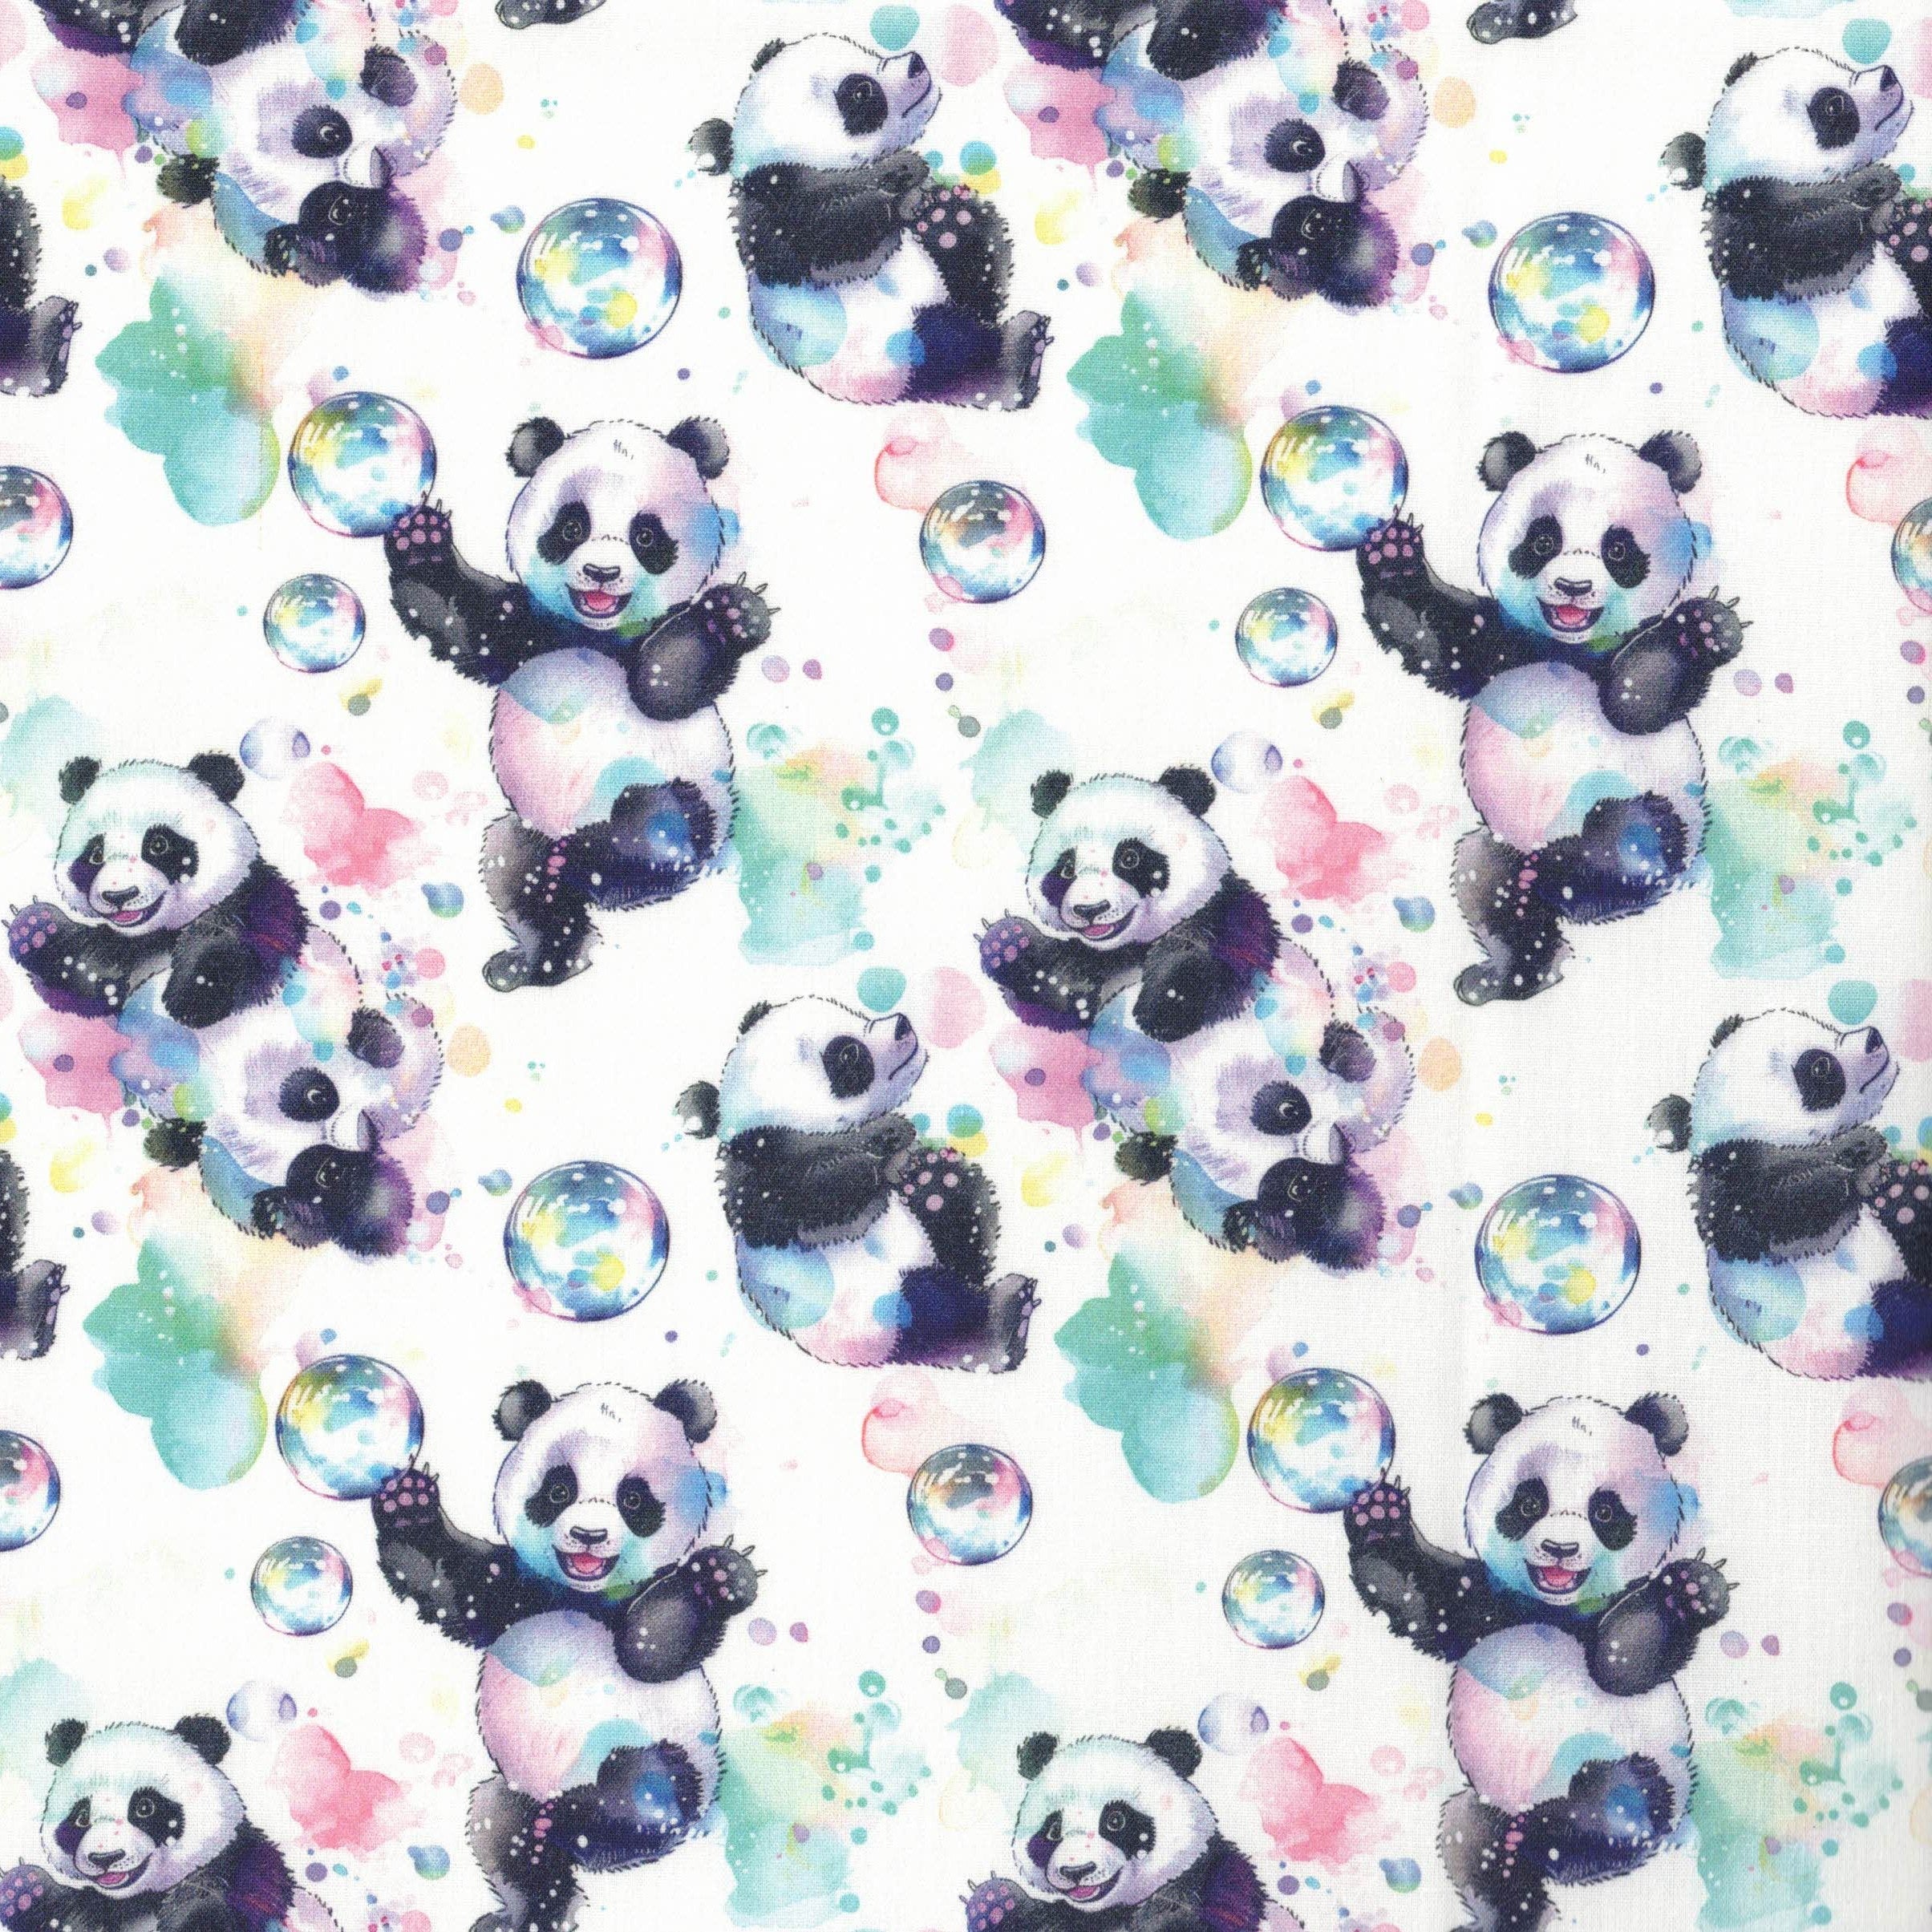 PRE-ORDER Quirky Cotton Animal Nature Wildlife Bear Bubbles Bamboo White (PRE-ORDER QC Playful Panda Cubs)